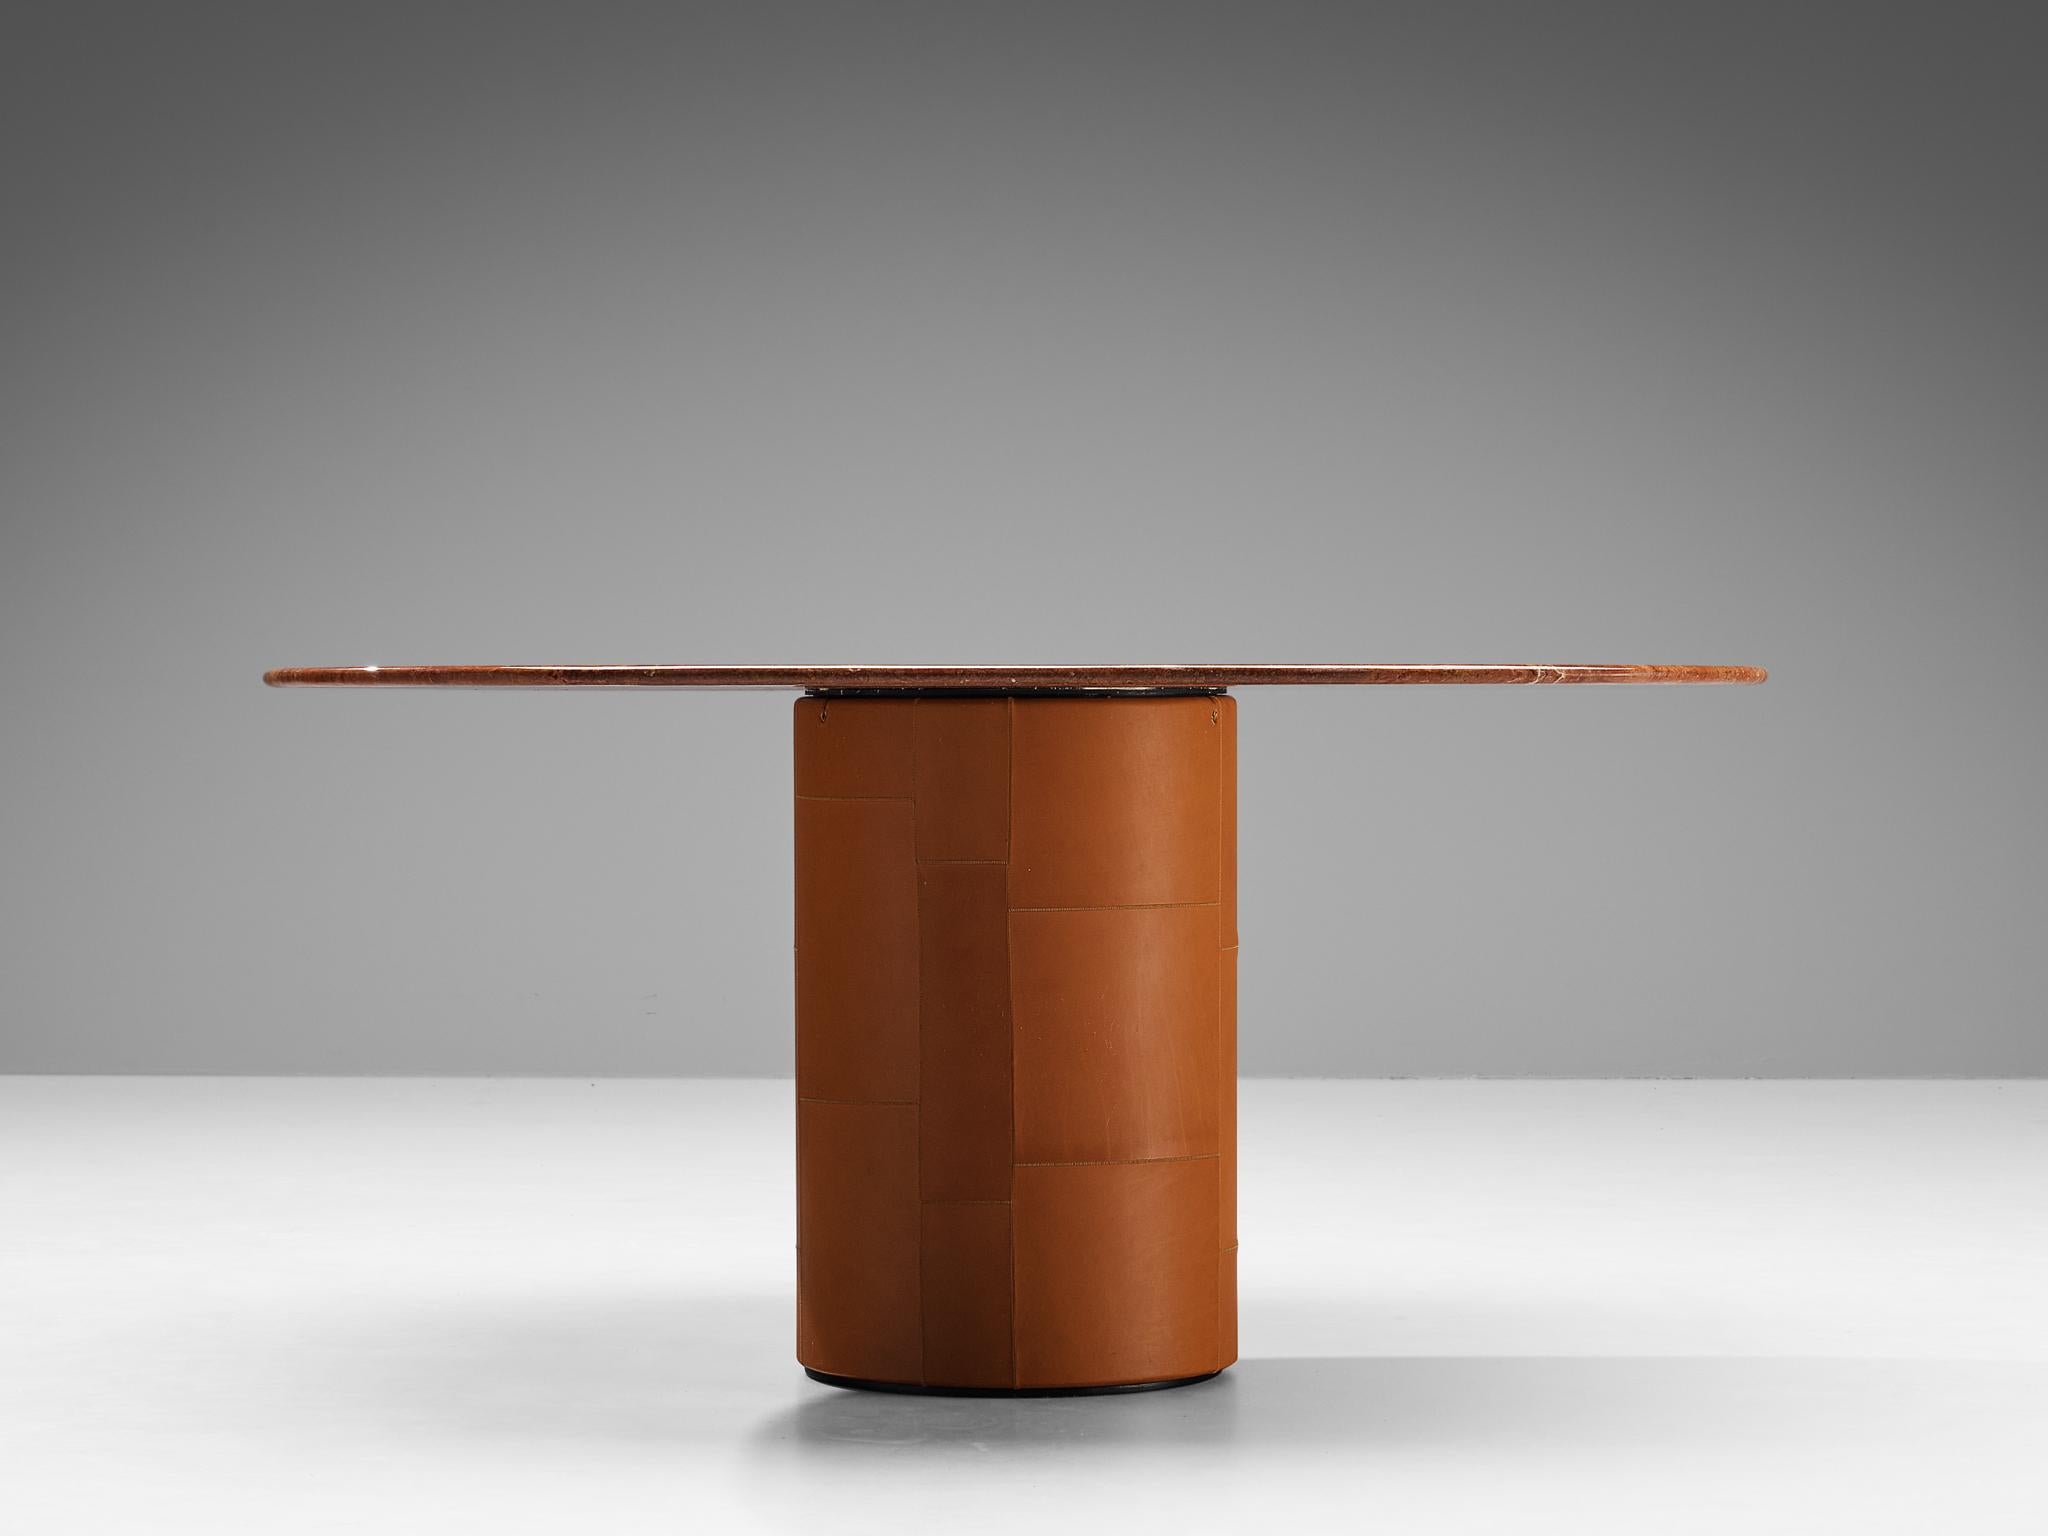 Afra & Tobia Scarpa for B&B Italia, 'Tobio' dining table, leather, travertine, Italy, design 1974

Gorgeous dining table designed by the iconic duo Afra and Tobia Scarpa. This table is made from a very beautiful red travertine. A glamorous